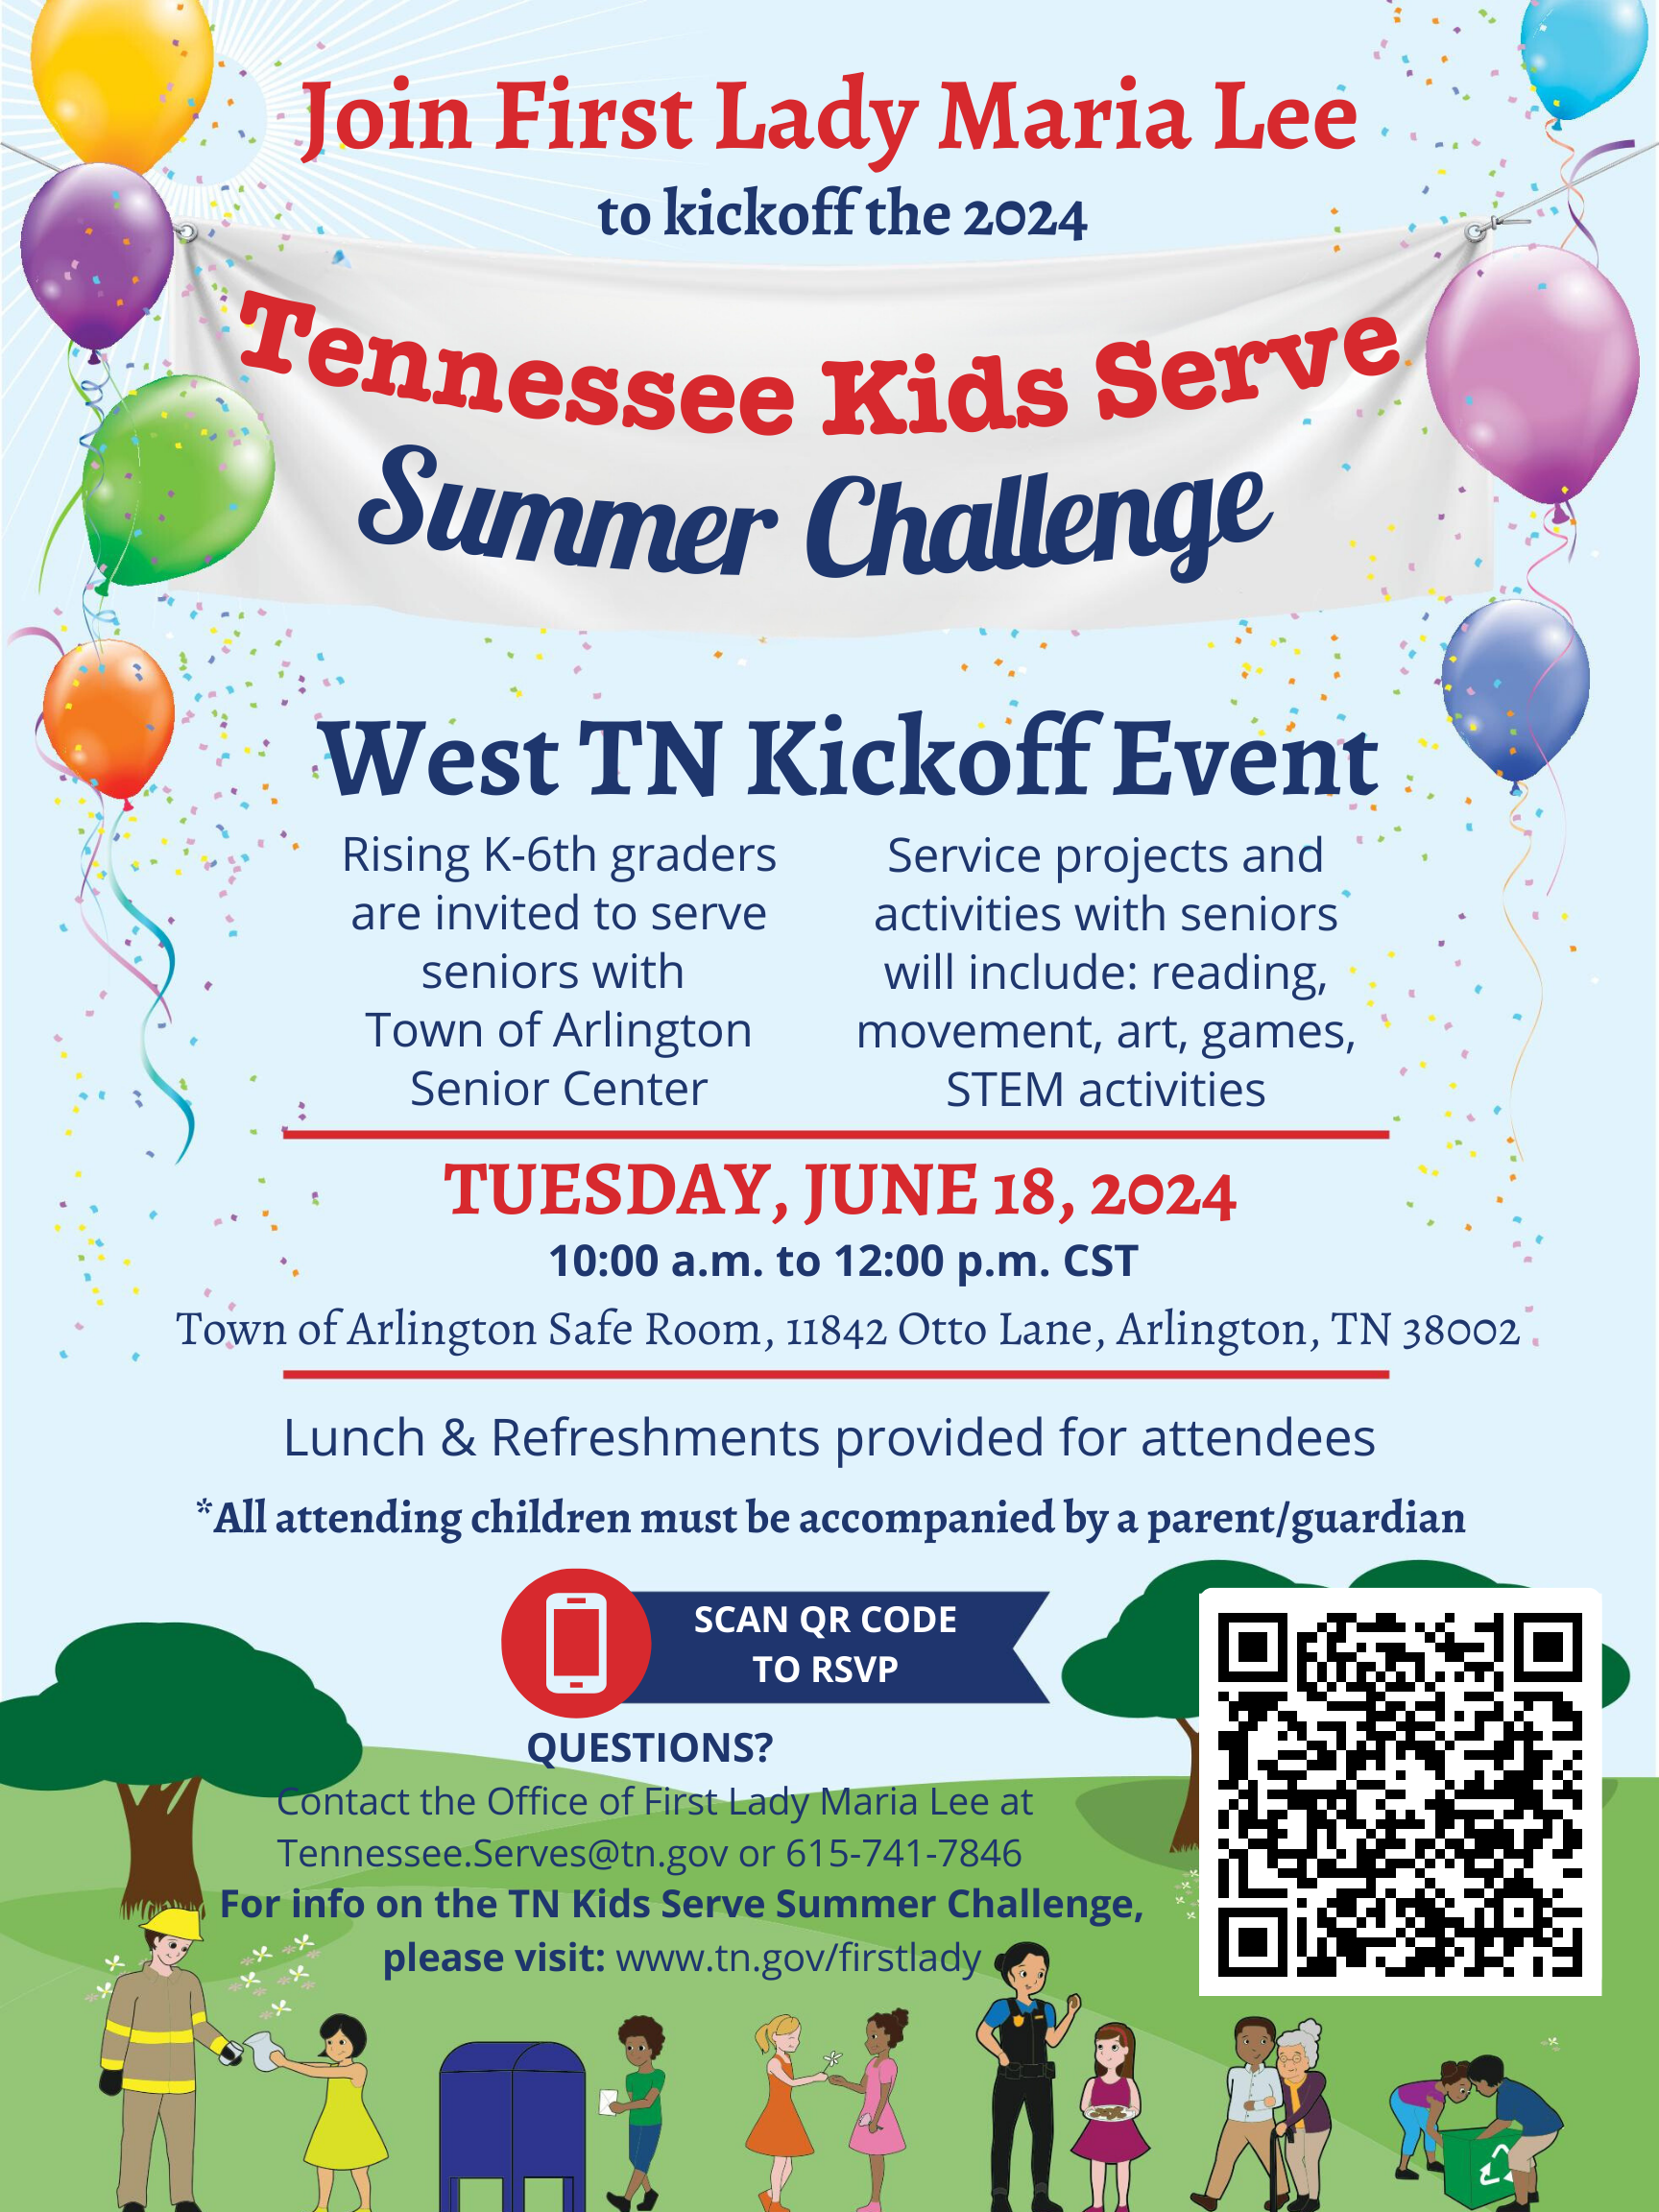 TN Kids Serve Summer Challenge information on West TN Kickoff Event - Tuesday, June 18 from 10 to Noon at Arlington Safe Room